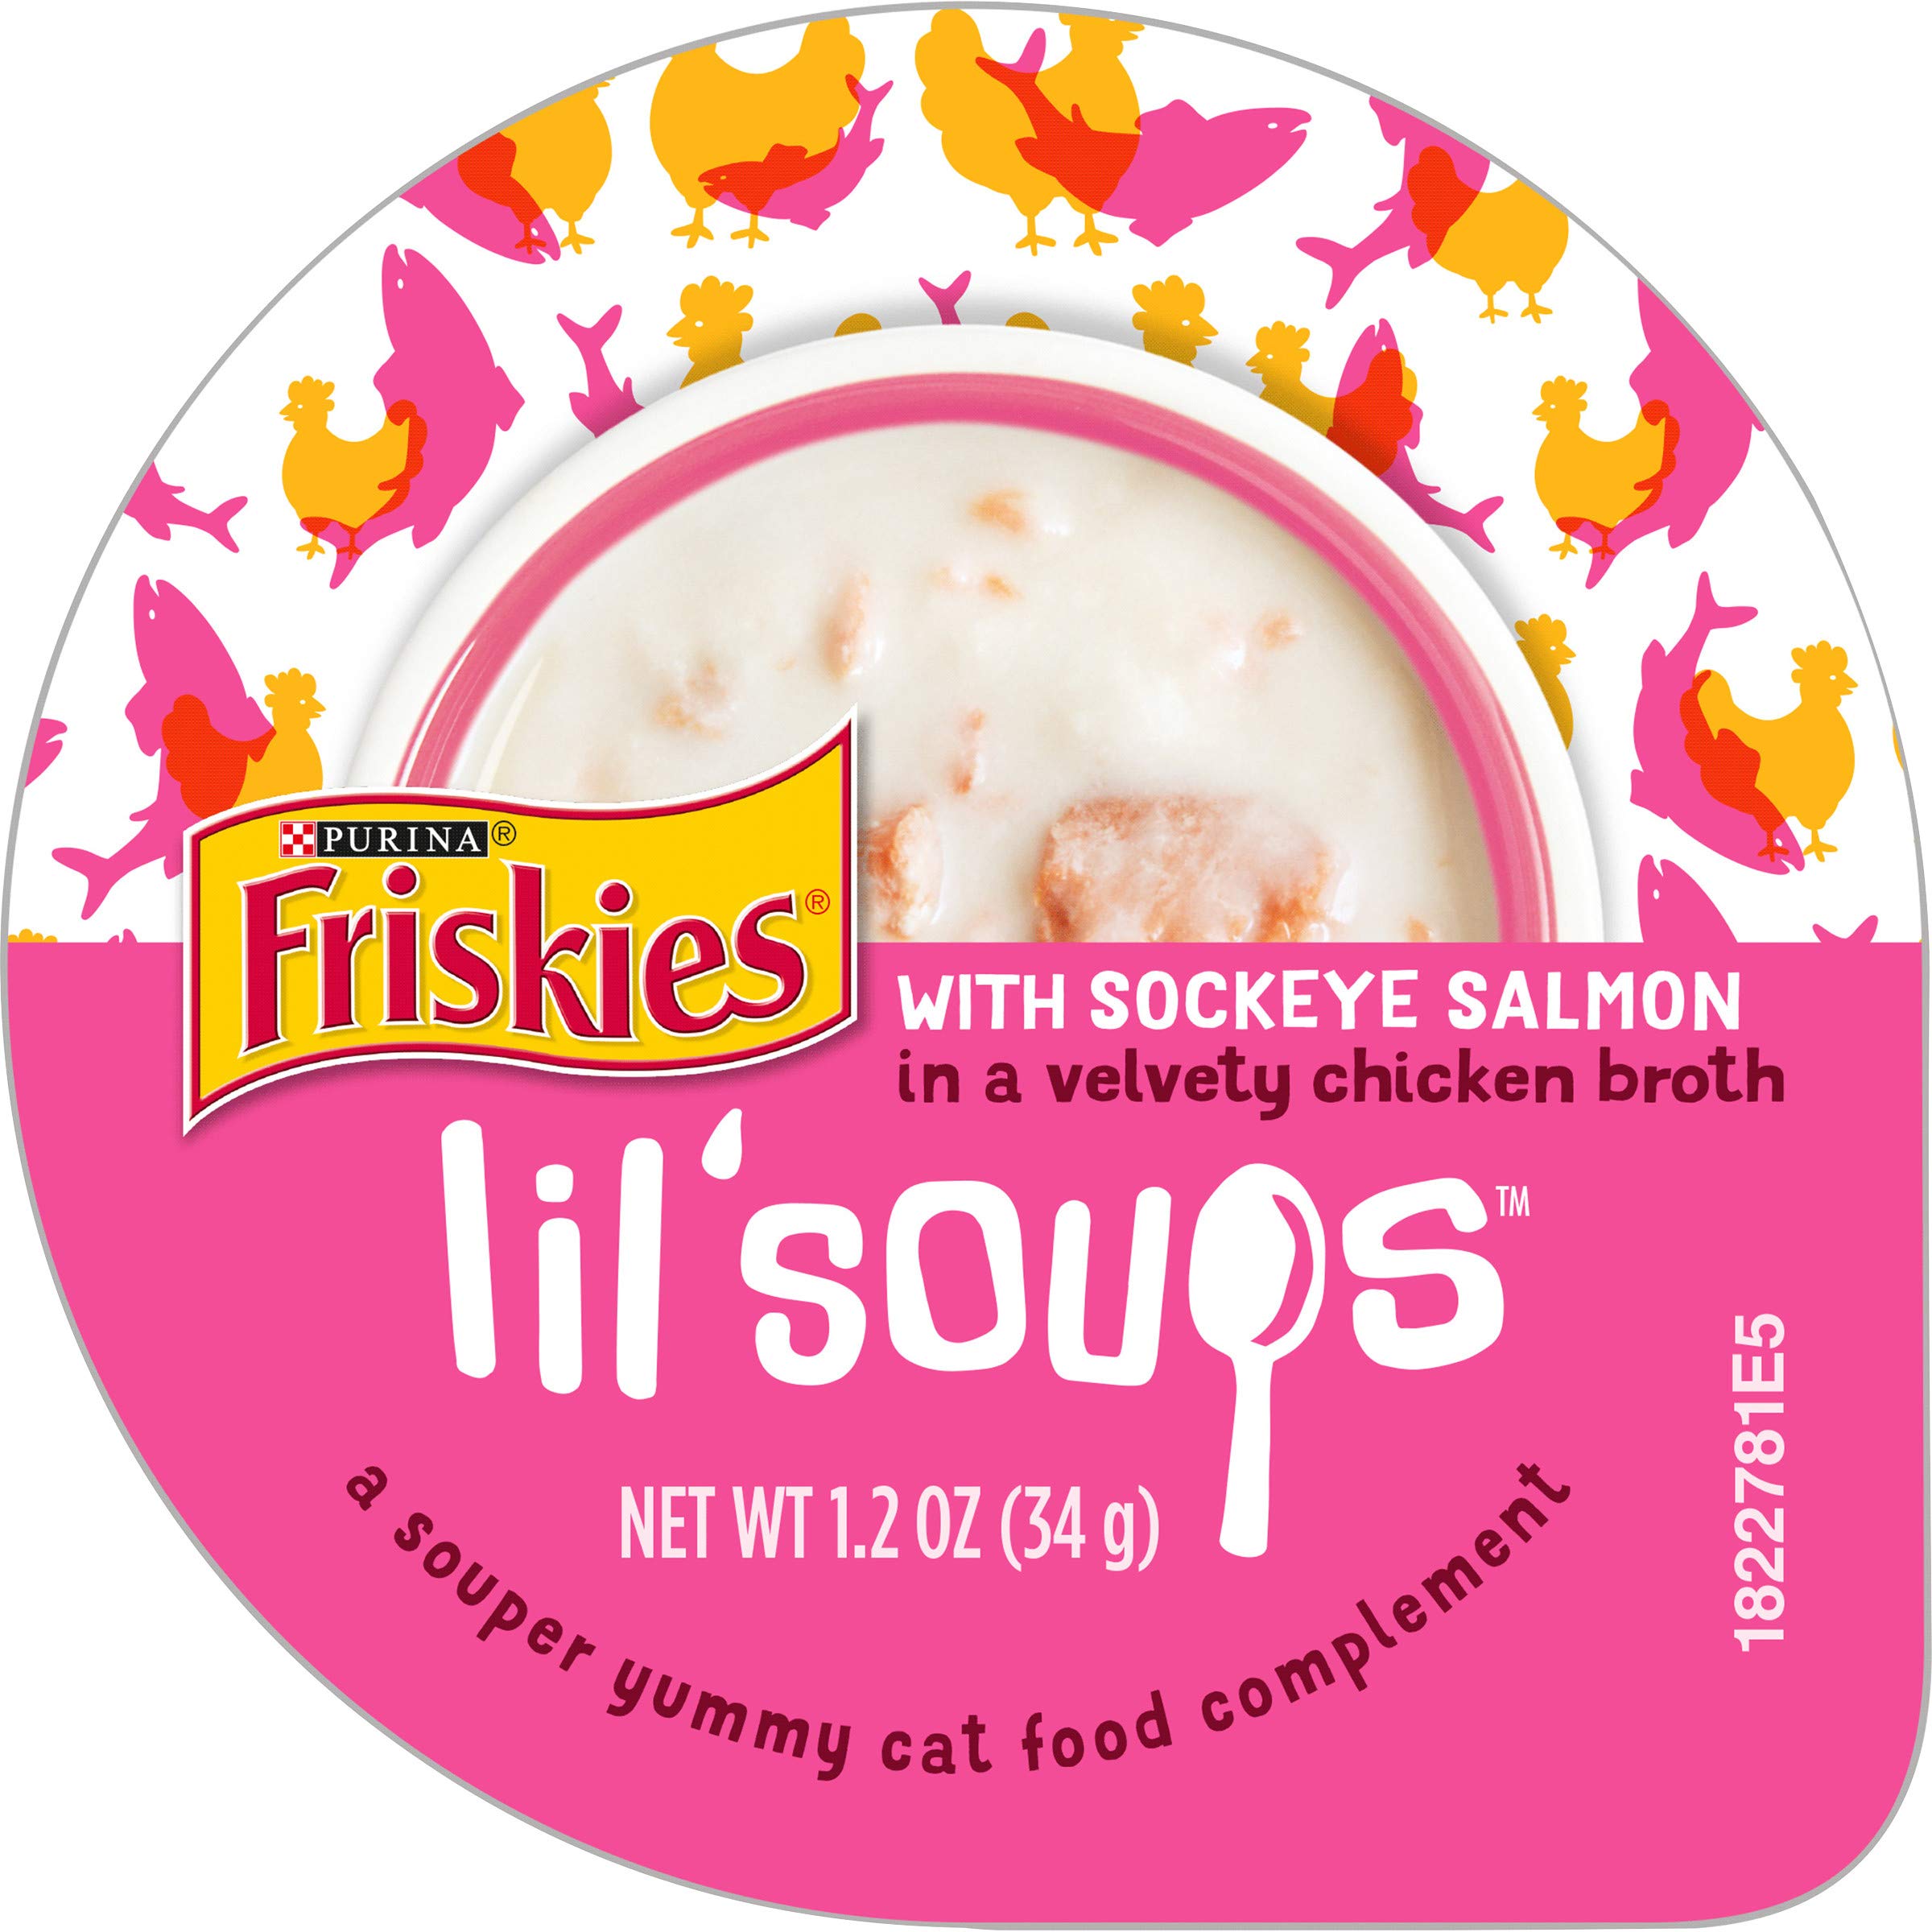 Book Cover Purina Friskies Natural, Grain Free Wet Cat Food Complement, Lil' Soups With Sockeye Salmon in Chicken Broth - (8) 1.2 oz. Cups Lil' Soups Sockeye Salmon in Chicken Broth (8) 1.2 oz Cups